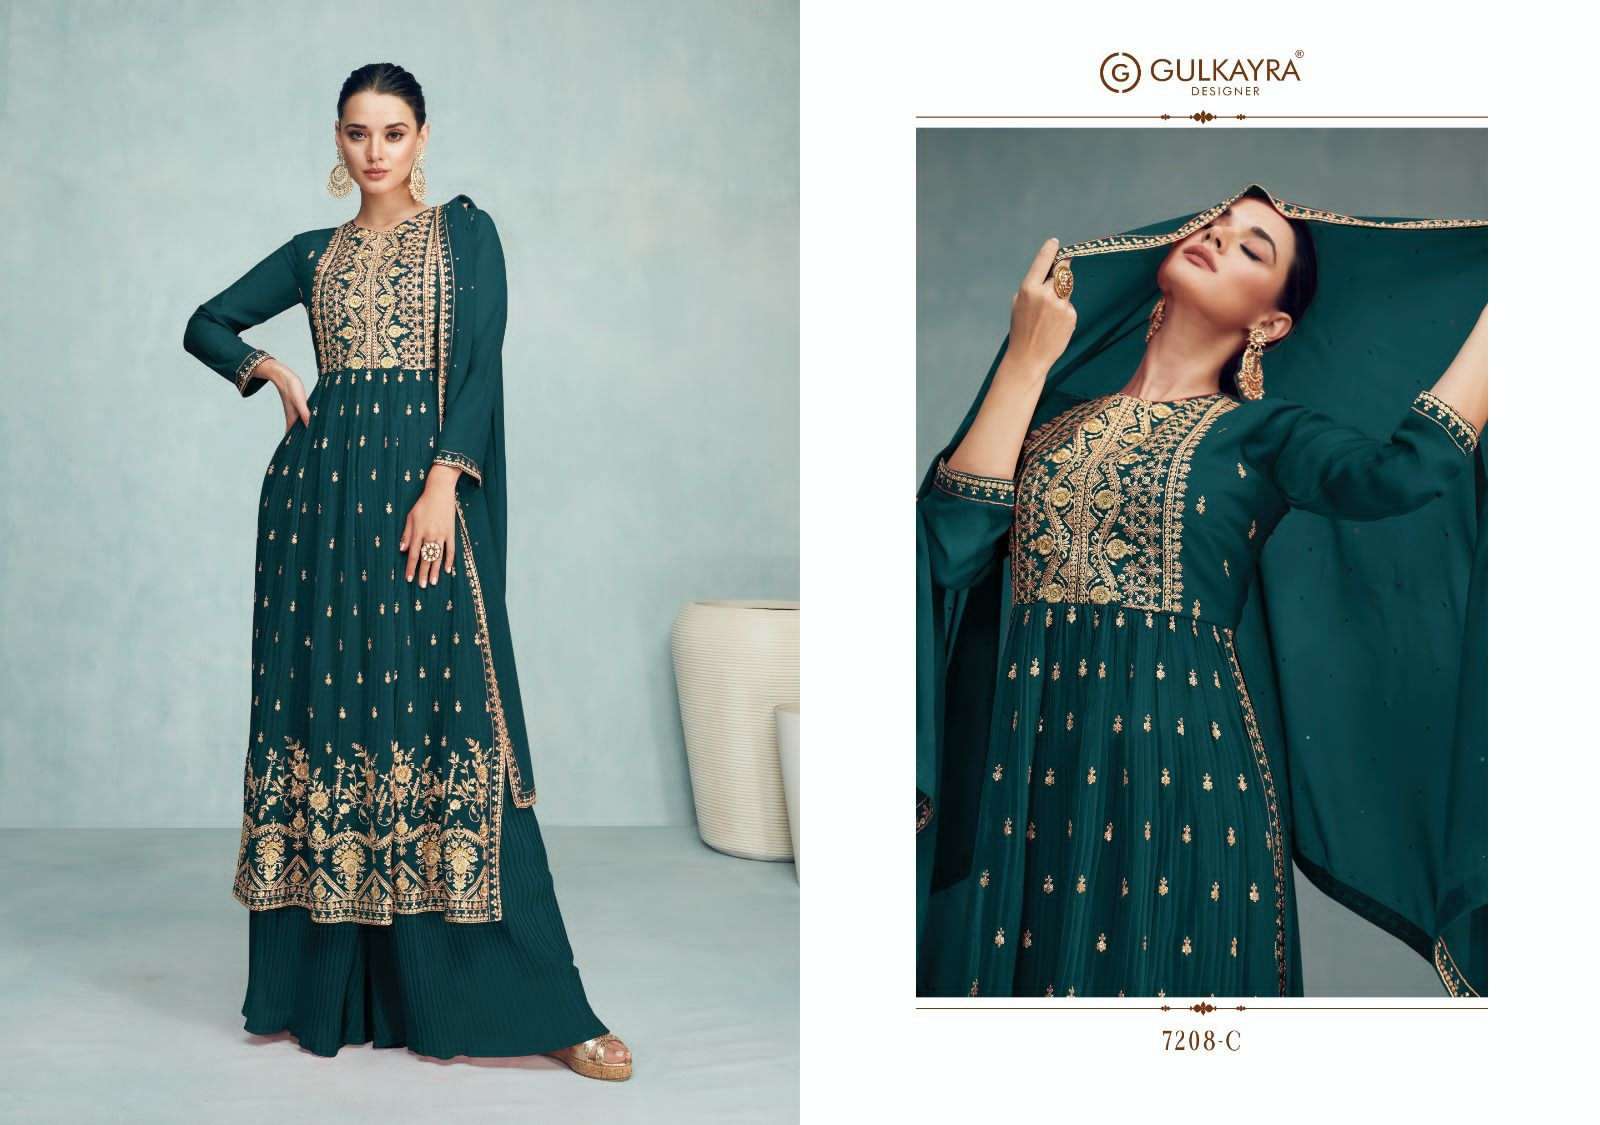 gulkayra designer nayra vol-8 7208 series blooming georgette designer party wear suits latest collection 2023